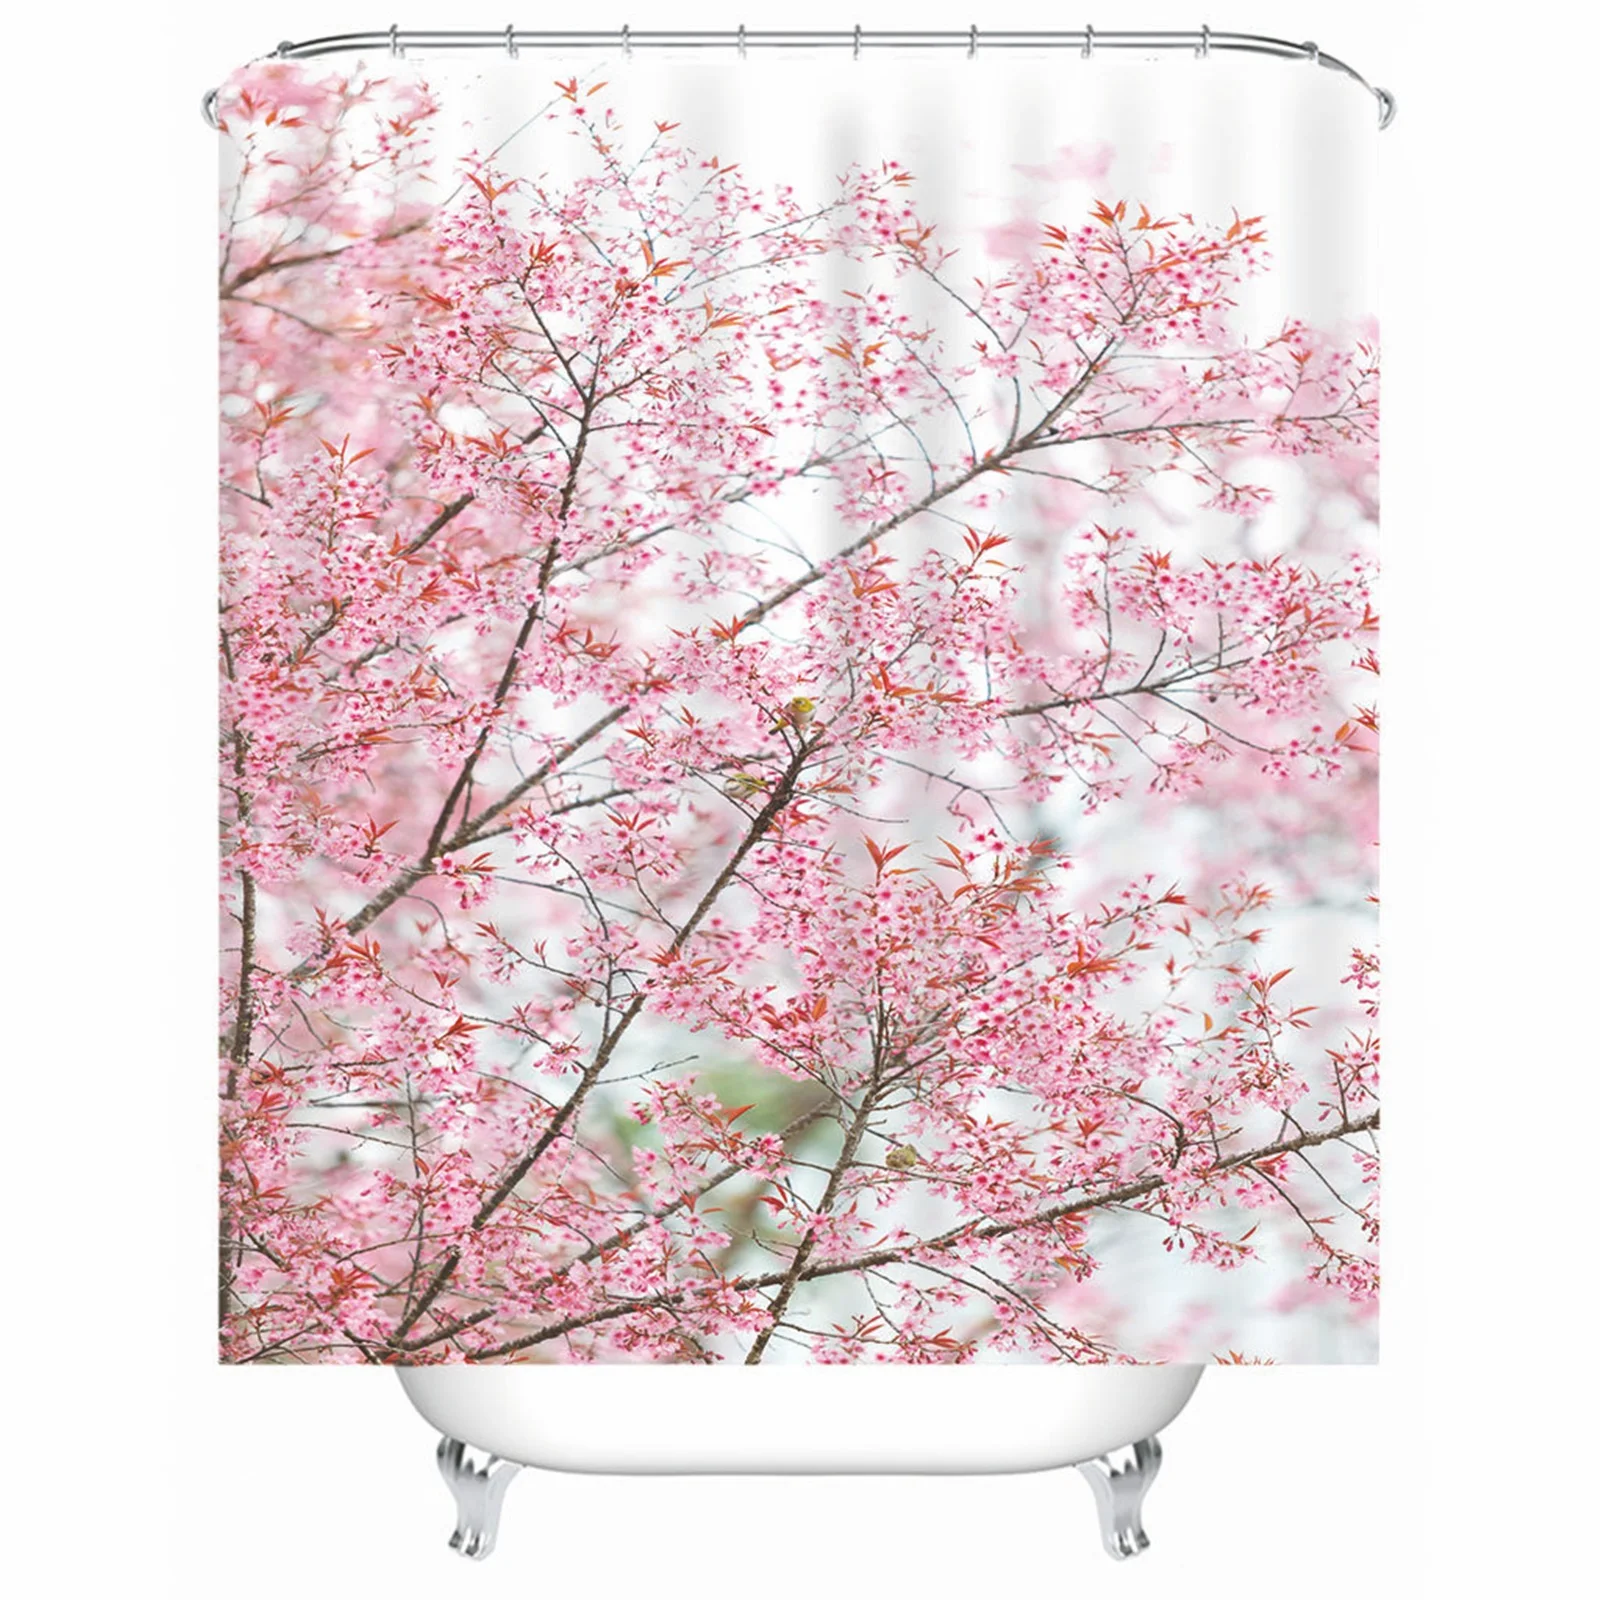 

Shower Curtain For Kids Polyester Blooming Flowers Pink White Mildew Resistant Waterproof Bathroom With Grommets Hooks